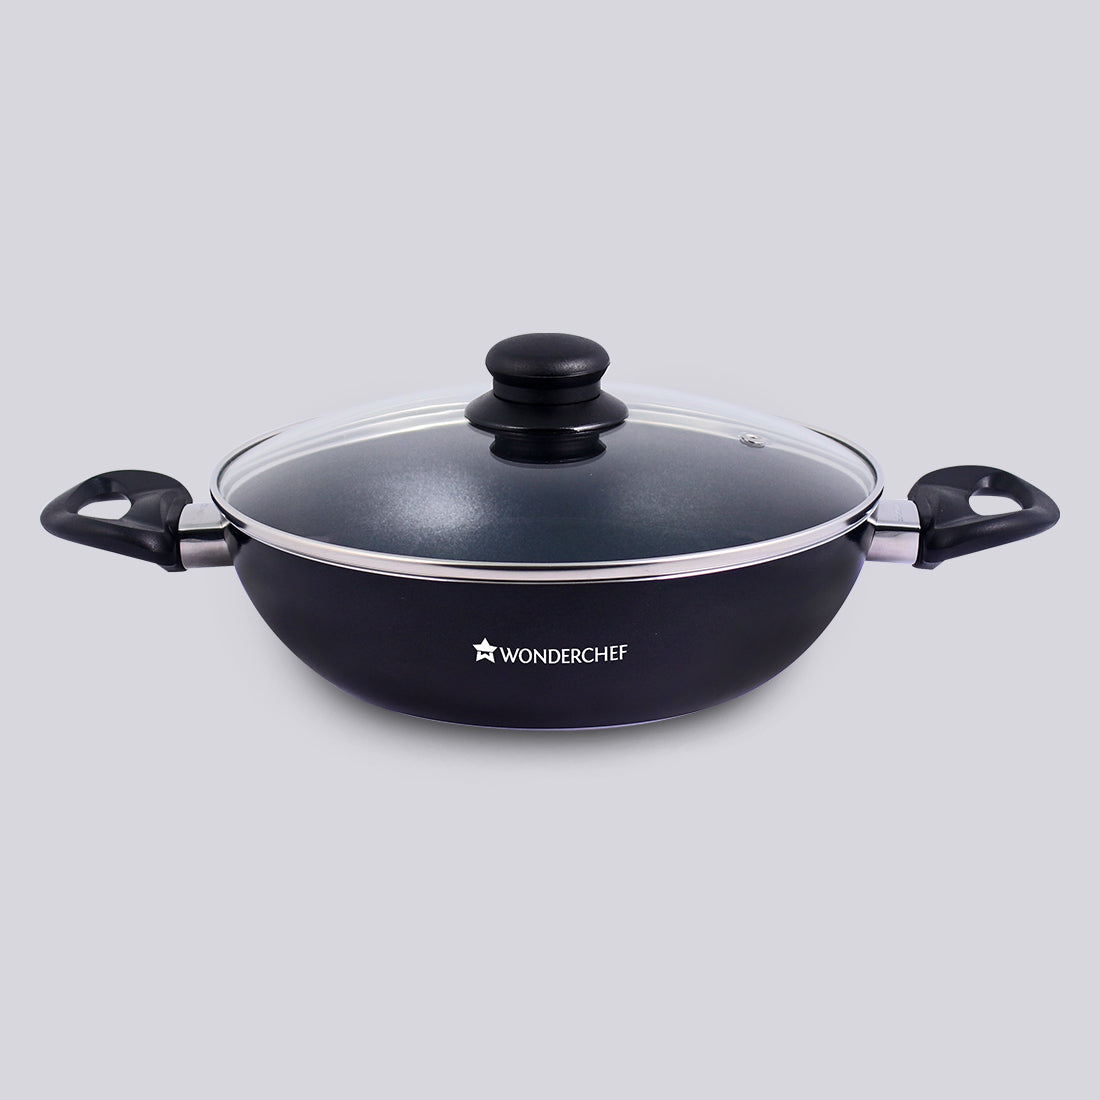 Ultra 24 cm Aluminium Non-Stick Wok | 2.7 L| Induction base| Meta-Tuff non-stick coating | Ideal for saute, roasting and healthy cooking| Black